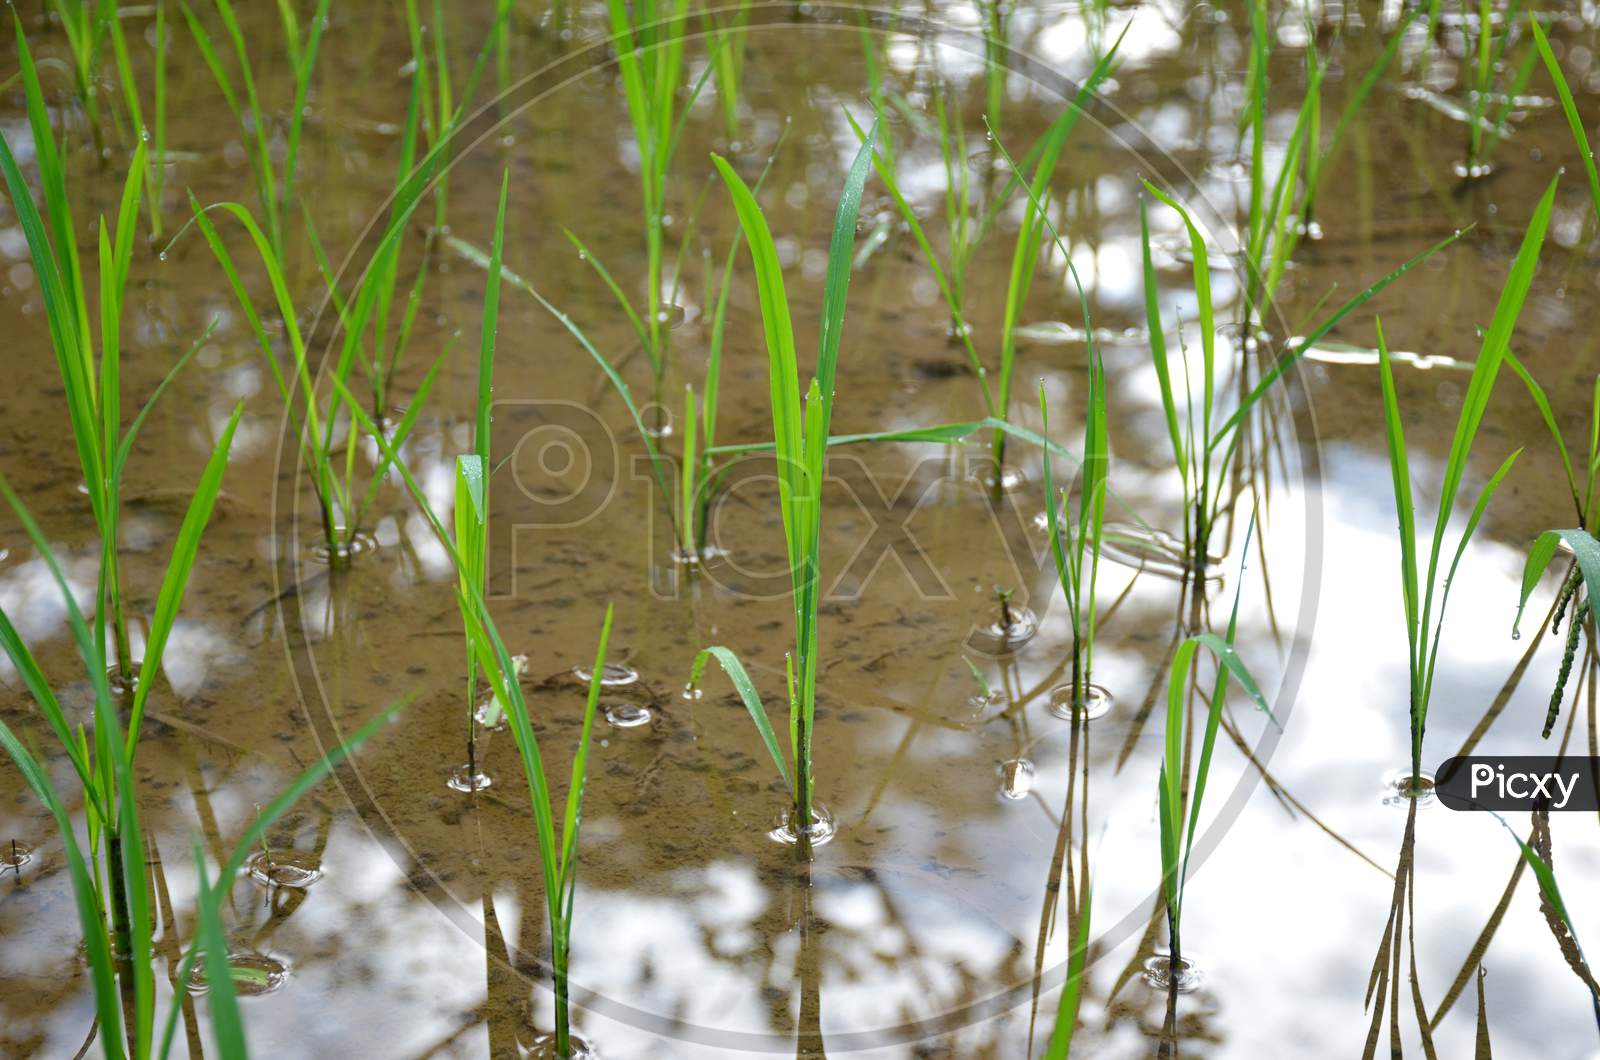 the green paddy plant seedlings in the water field.